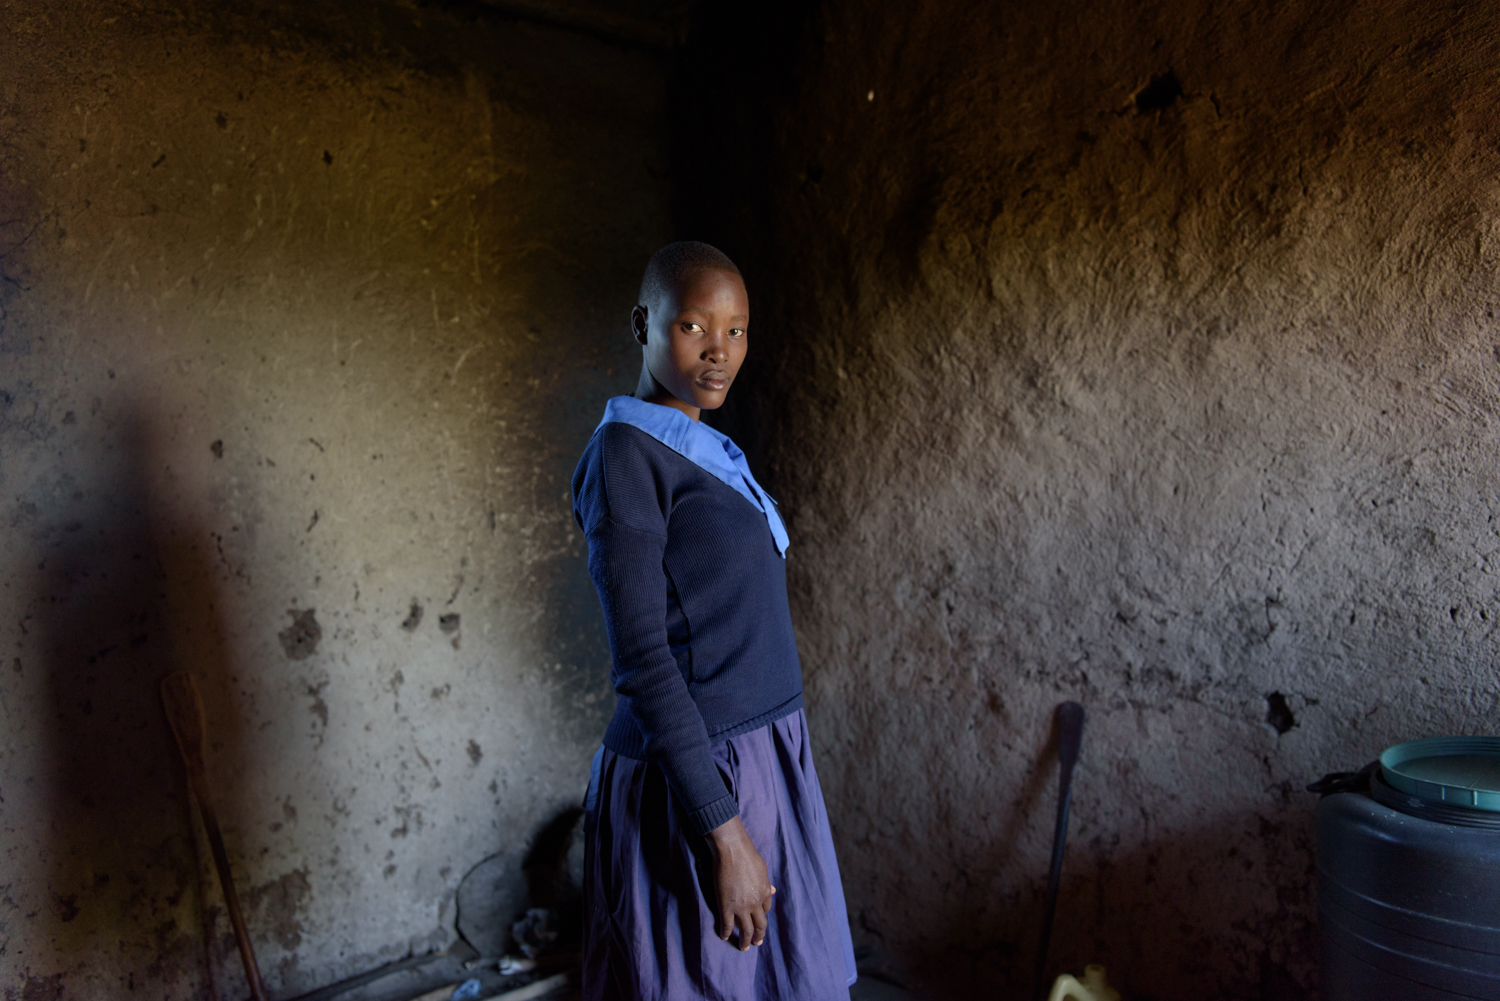  D.R., 16, studies at the Ngukumahando Primary School and runs home everyday during lunch break to breastfeed her newborn. D.'s family is supportive and her mother takes care of her child when she is at school. 